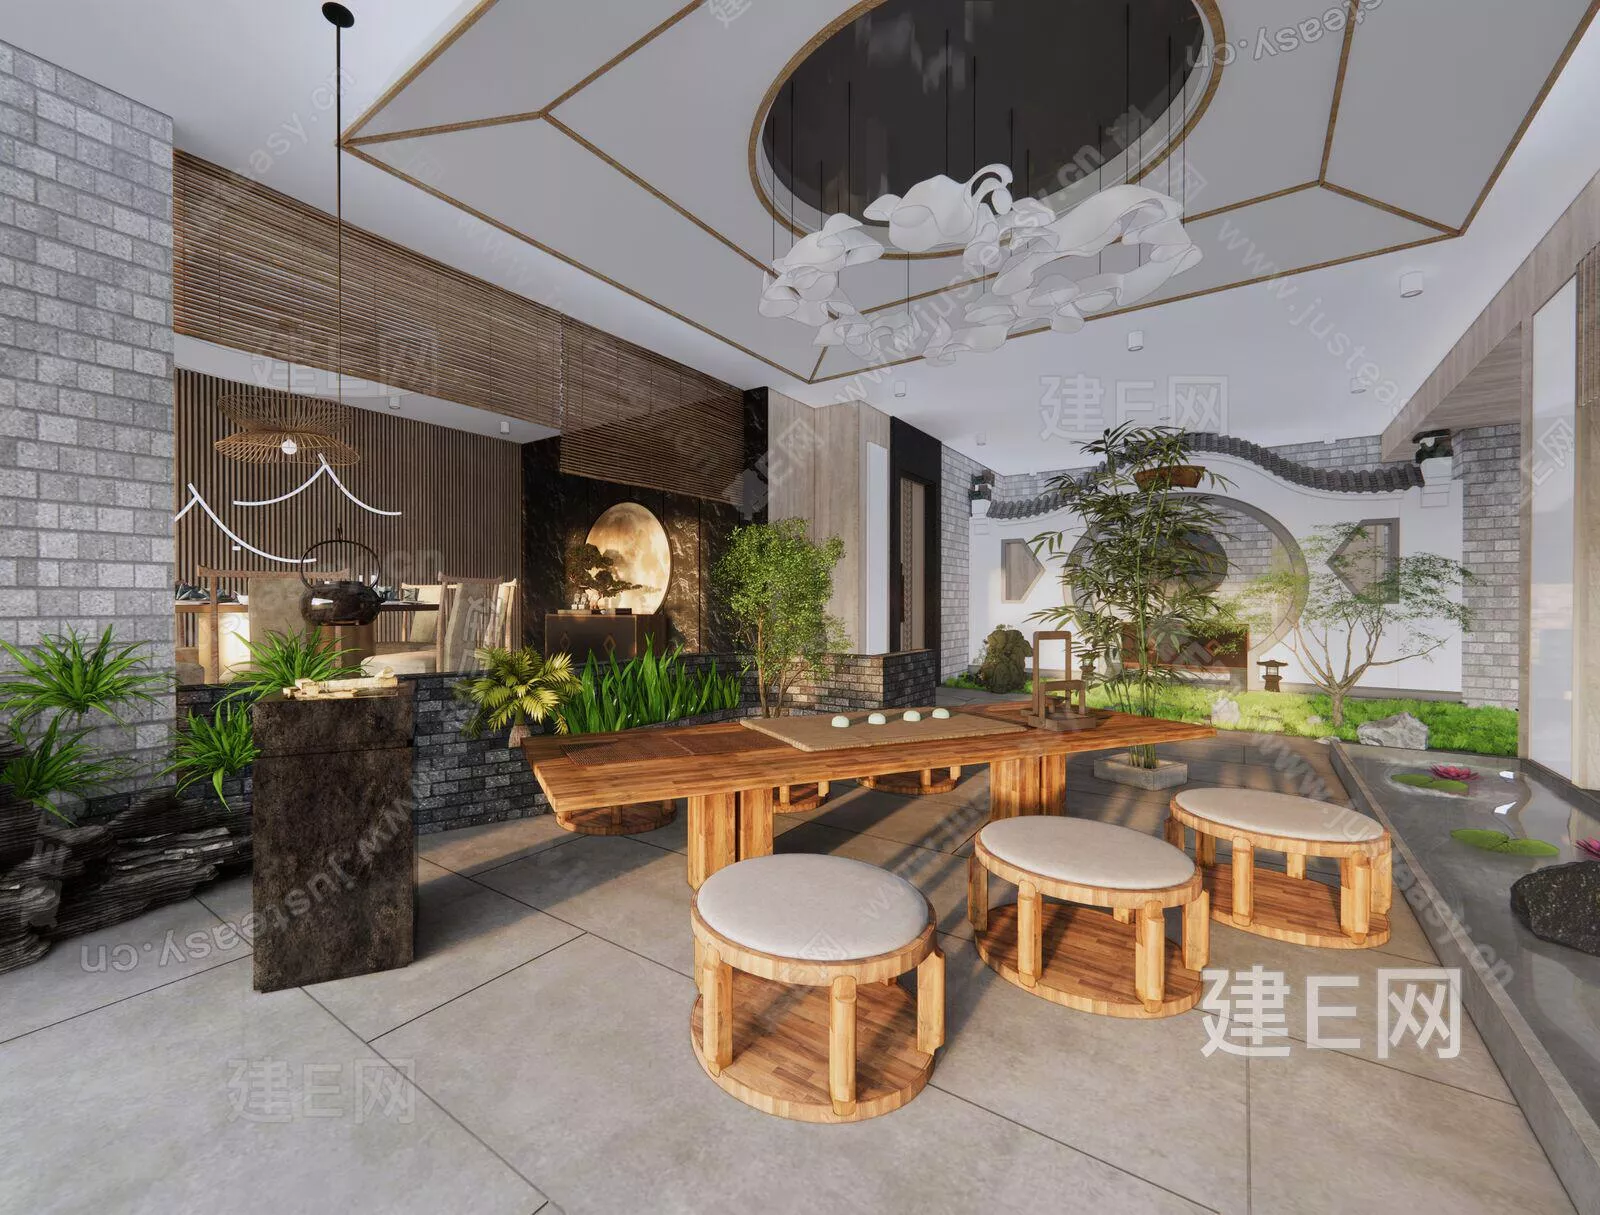 CHINESE TEAROOM - SKETCHUP 3D SCENE - ENSCAPE - 116474594